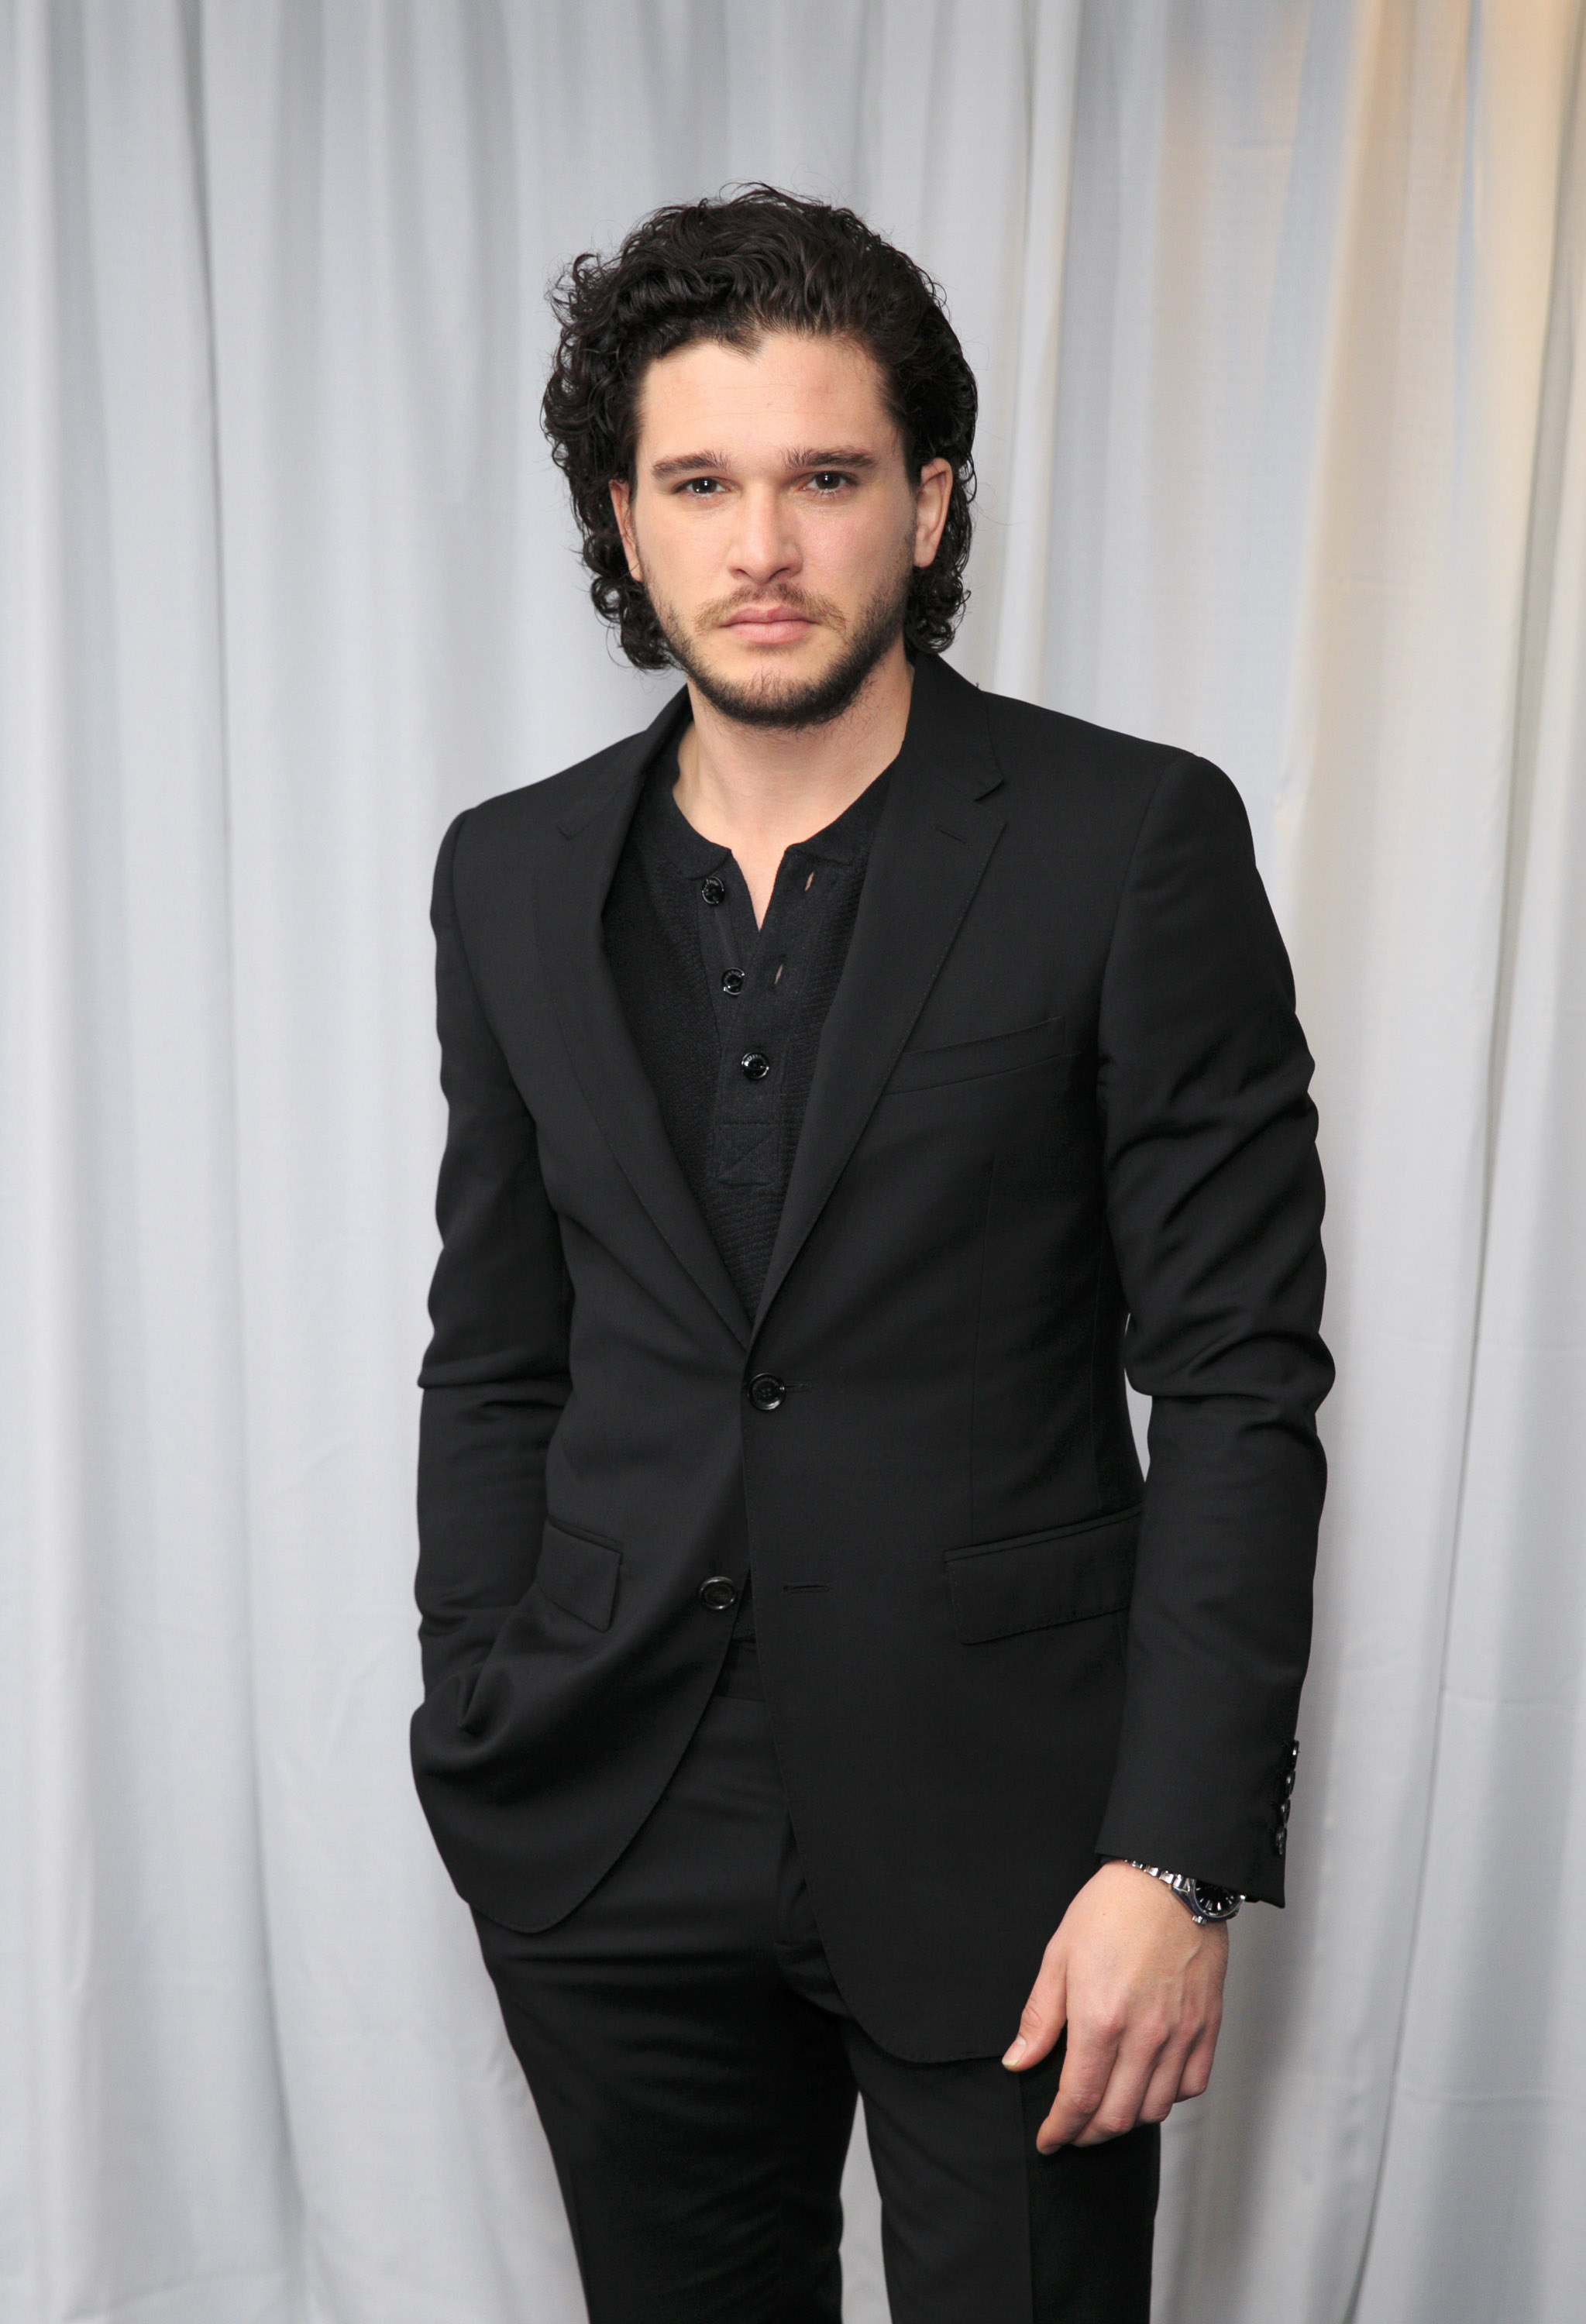 Kit Harington attends the Jameson Empire Awards 2015 at Grosvenor House, on March 29, 2015 in London, England. (John Phillips&mdash;Getty Images for Jameson)